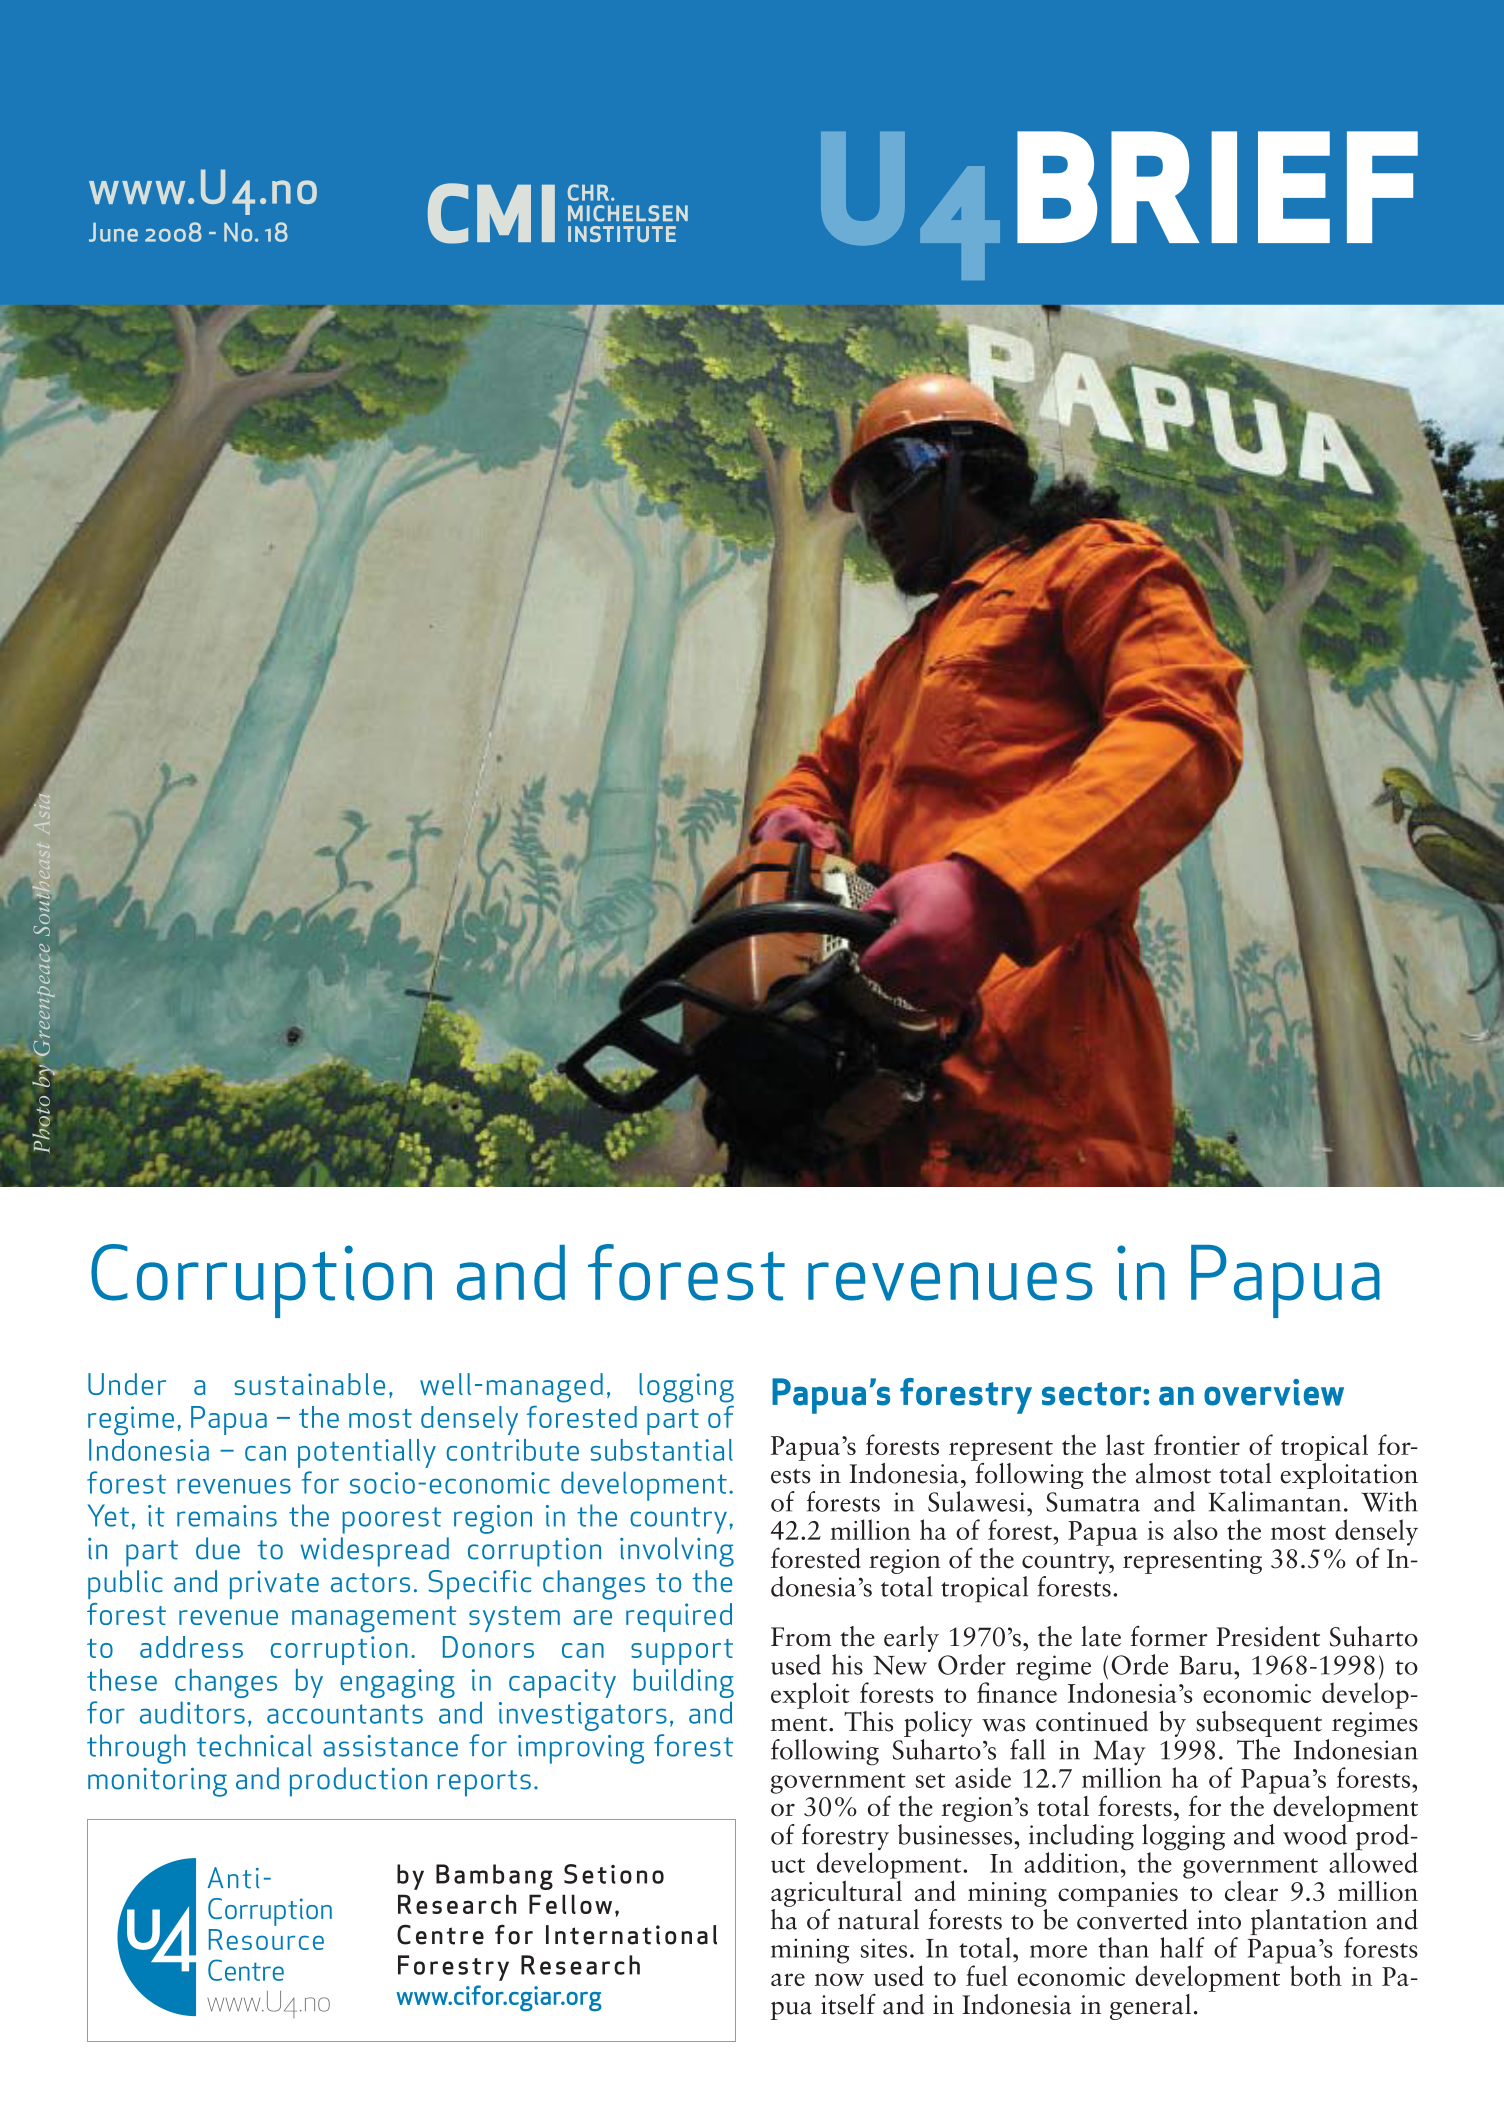 Corruption and forest revenues in Papua